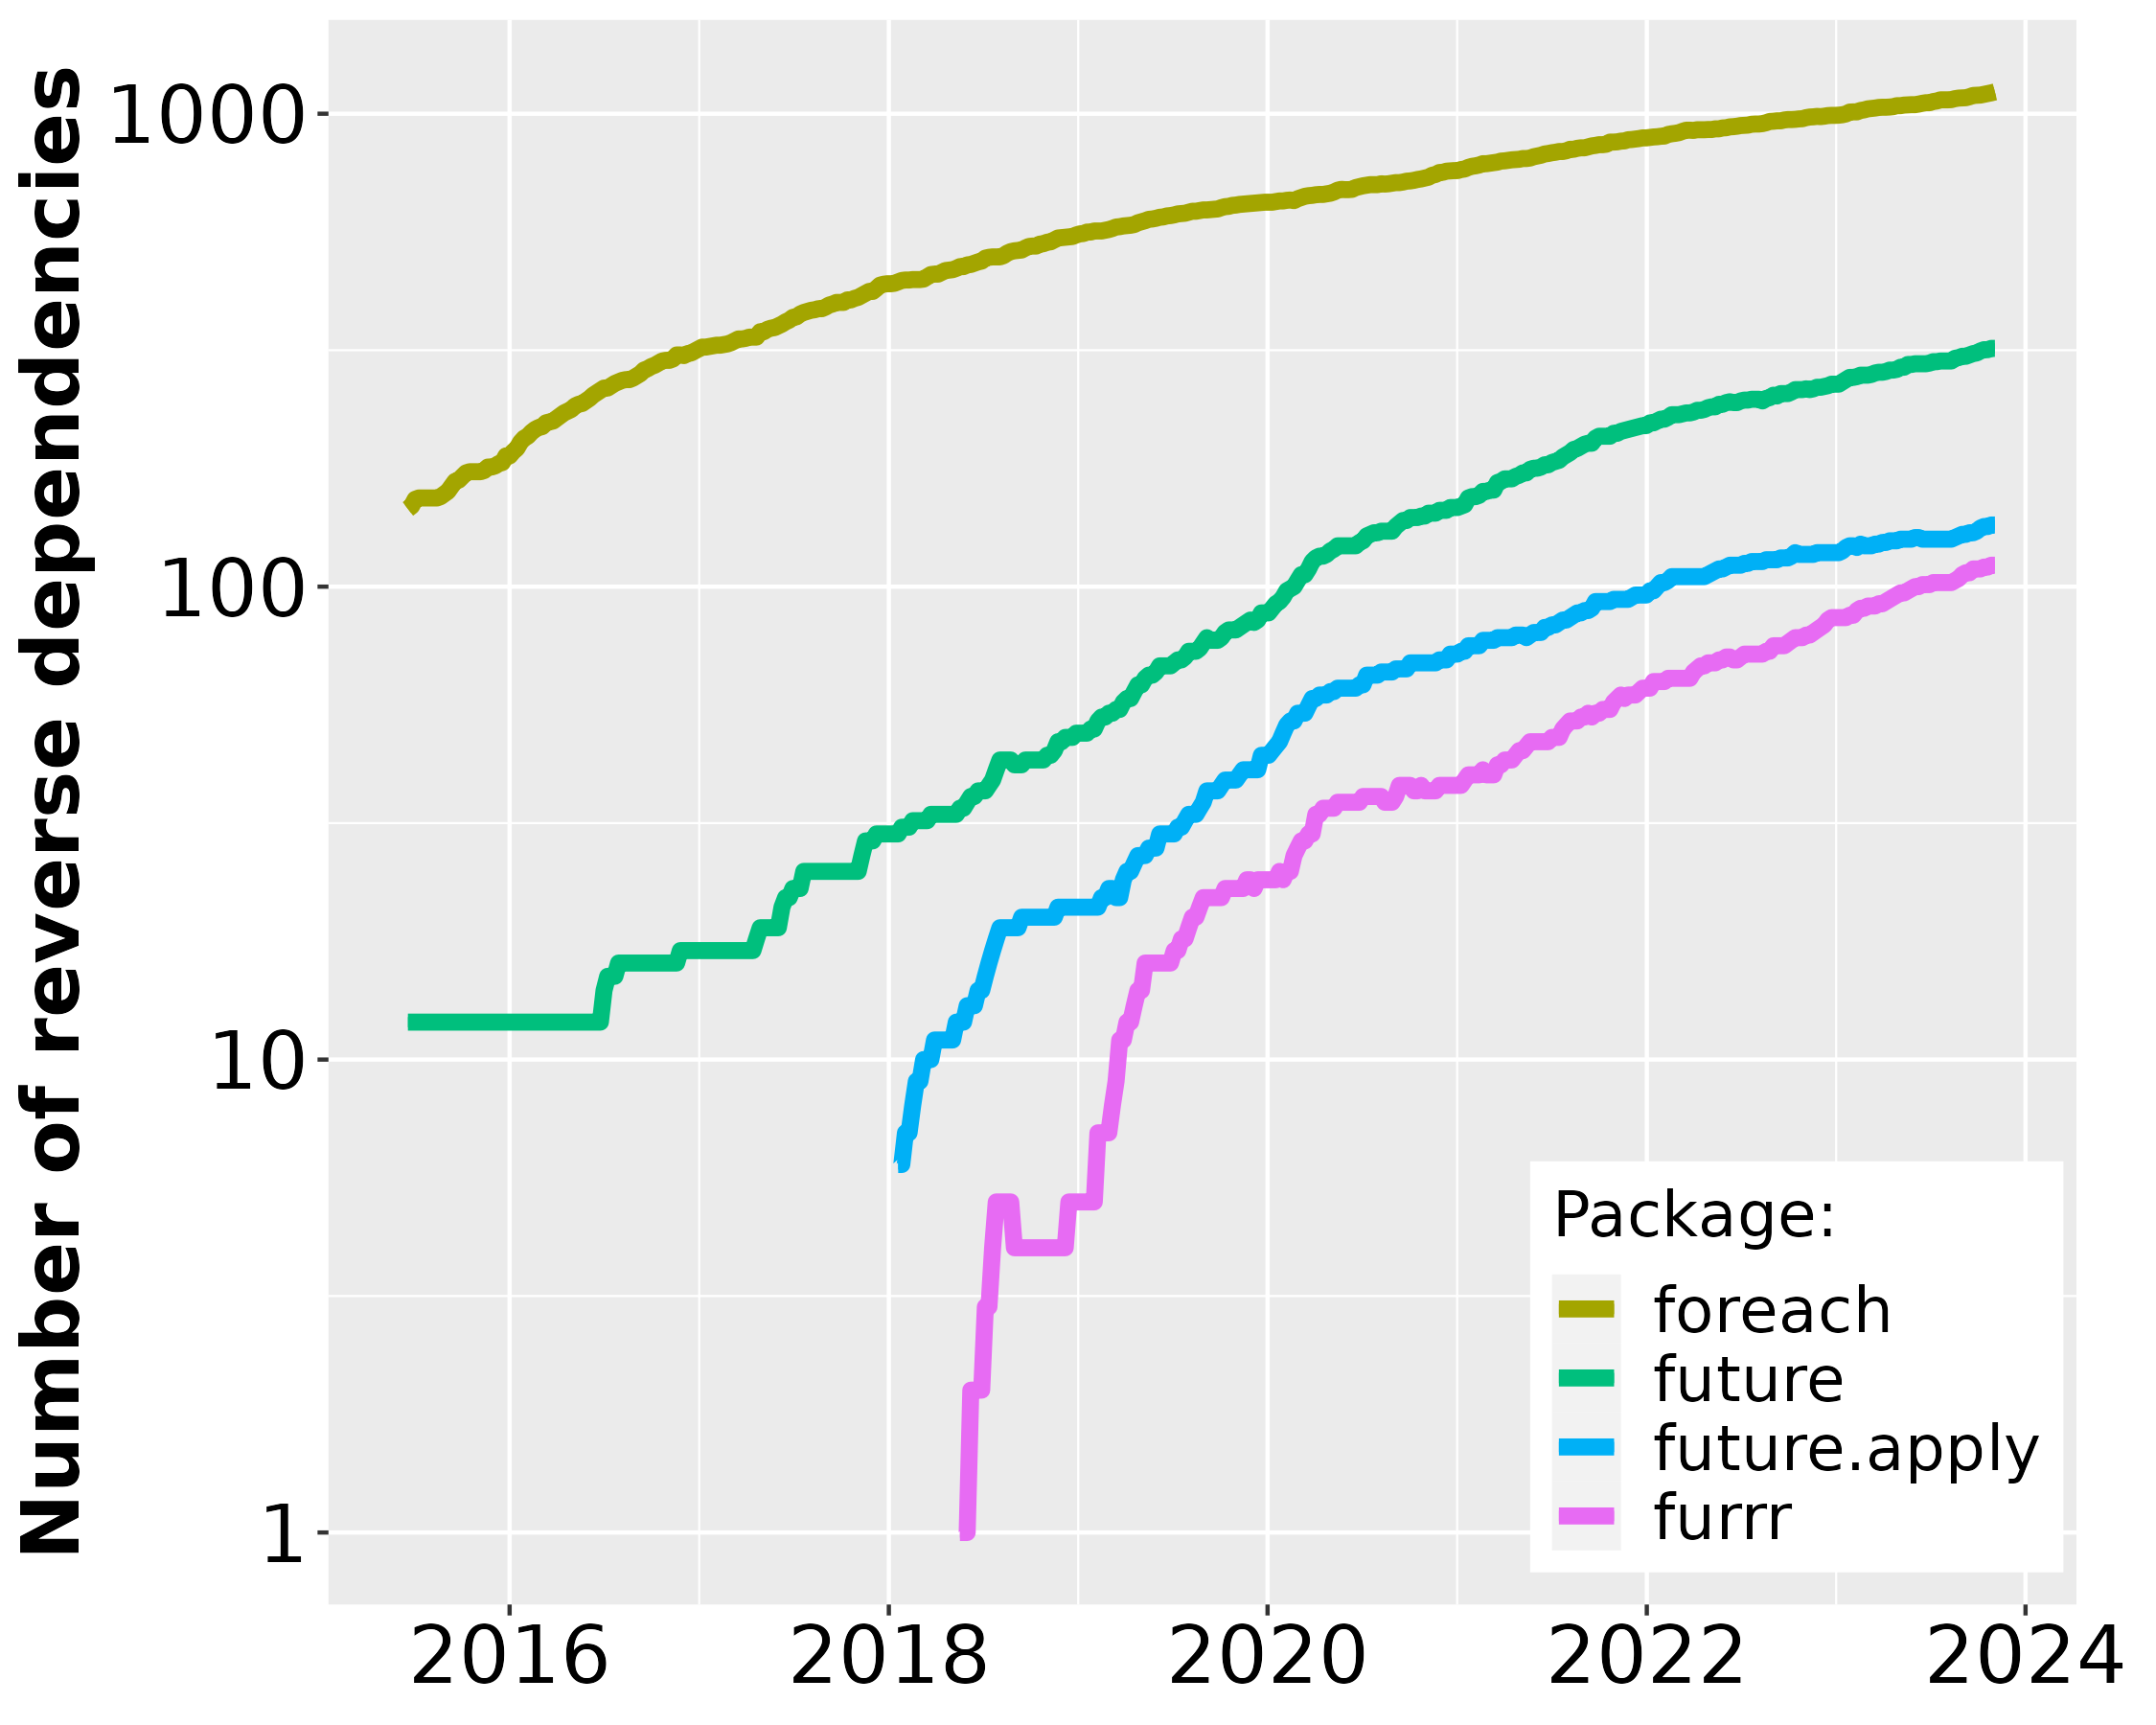 A line graph with 2015-2022 on the horizontal axis and 'Number of reverse dependencies' on the vertical axis, which is on the logarithmic scale. Curves for four packages, 'foreach', 'future', 'future.apply', and 'furrr', are shown, where foreach has more dependencies but with a lower slope than the others during recent years.